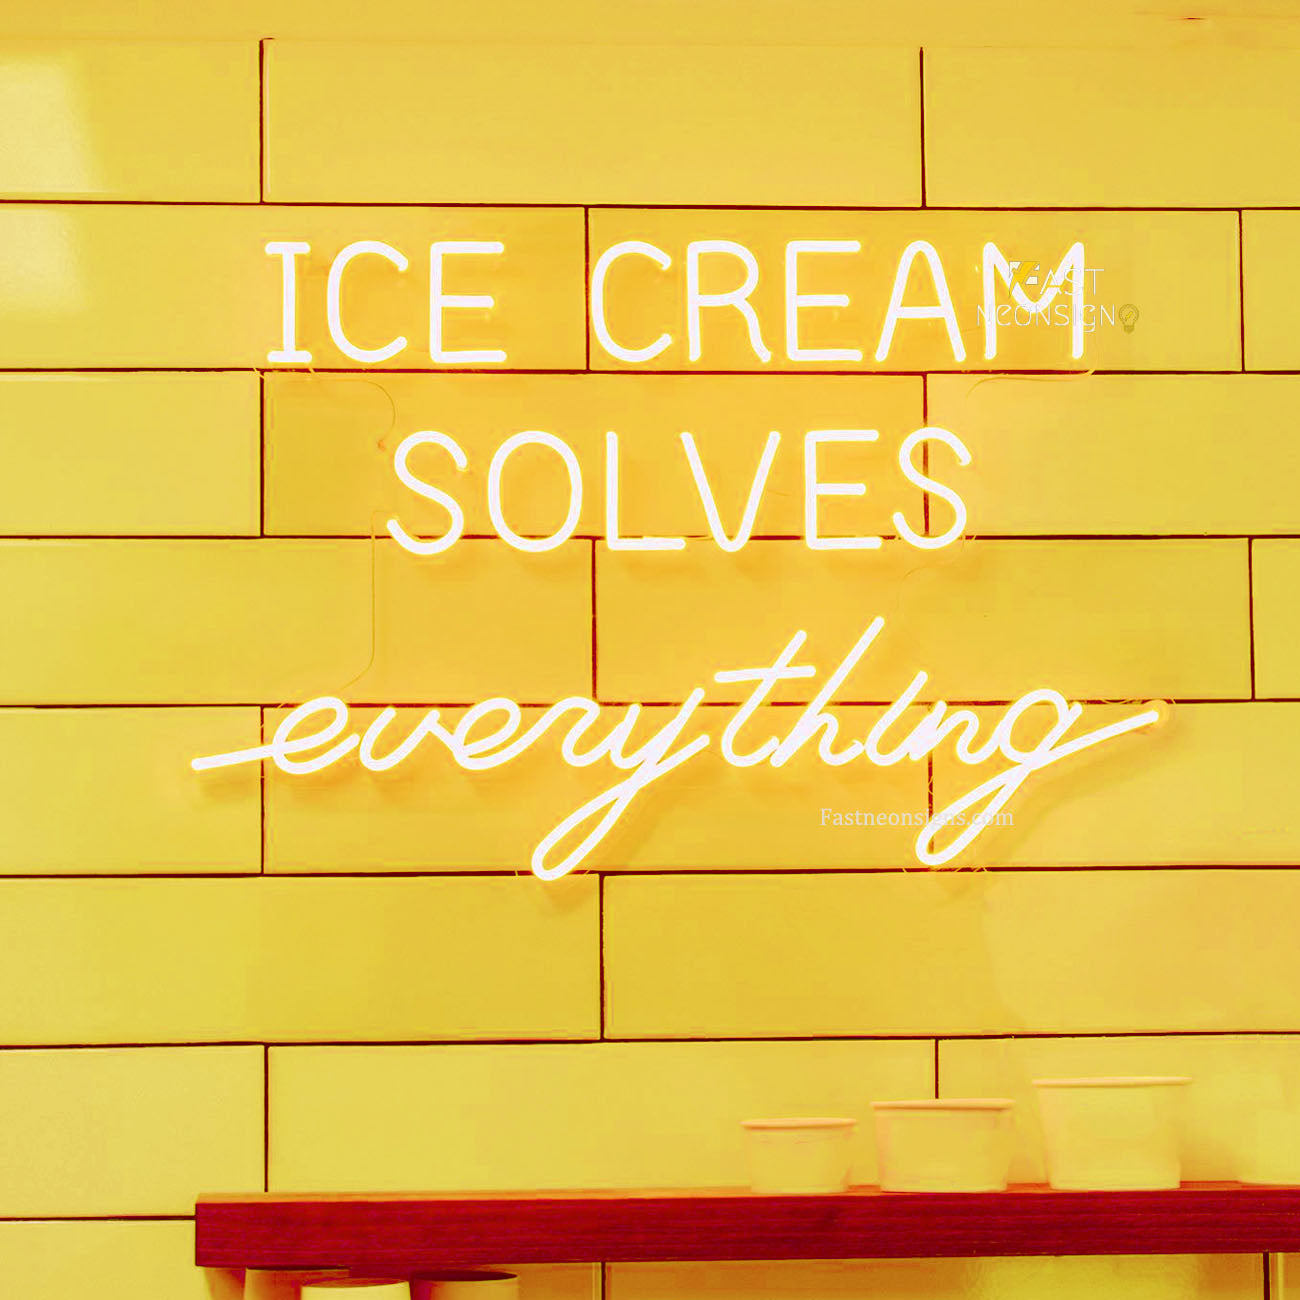 Ice Cream Solves Everything Neon Sign